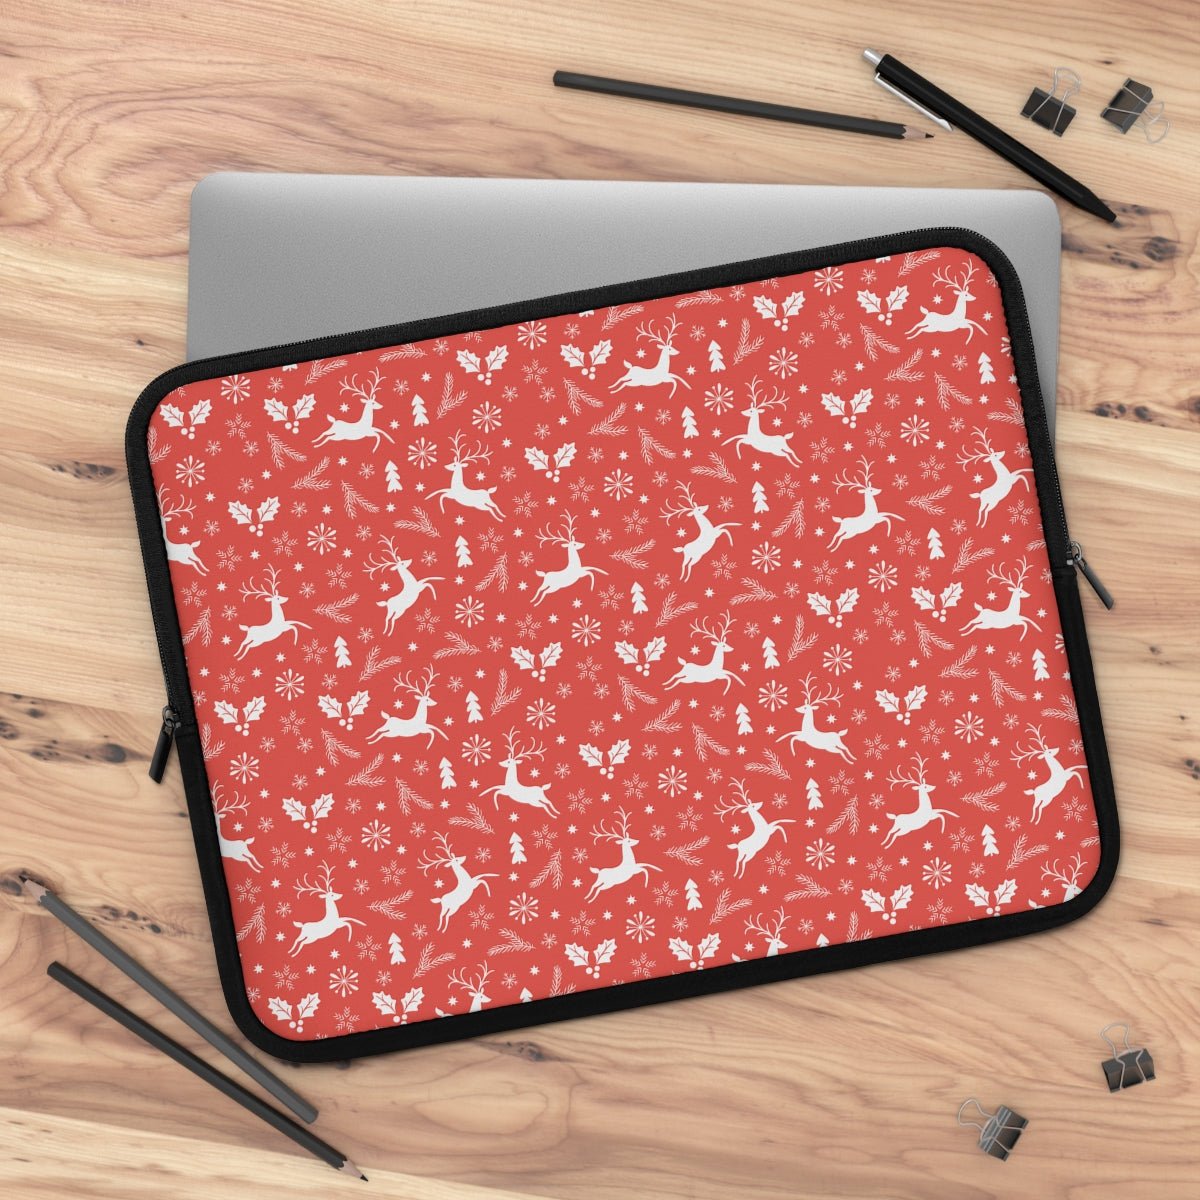 Christmas Reindeers Laptop Sleeve - Puffin Lime